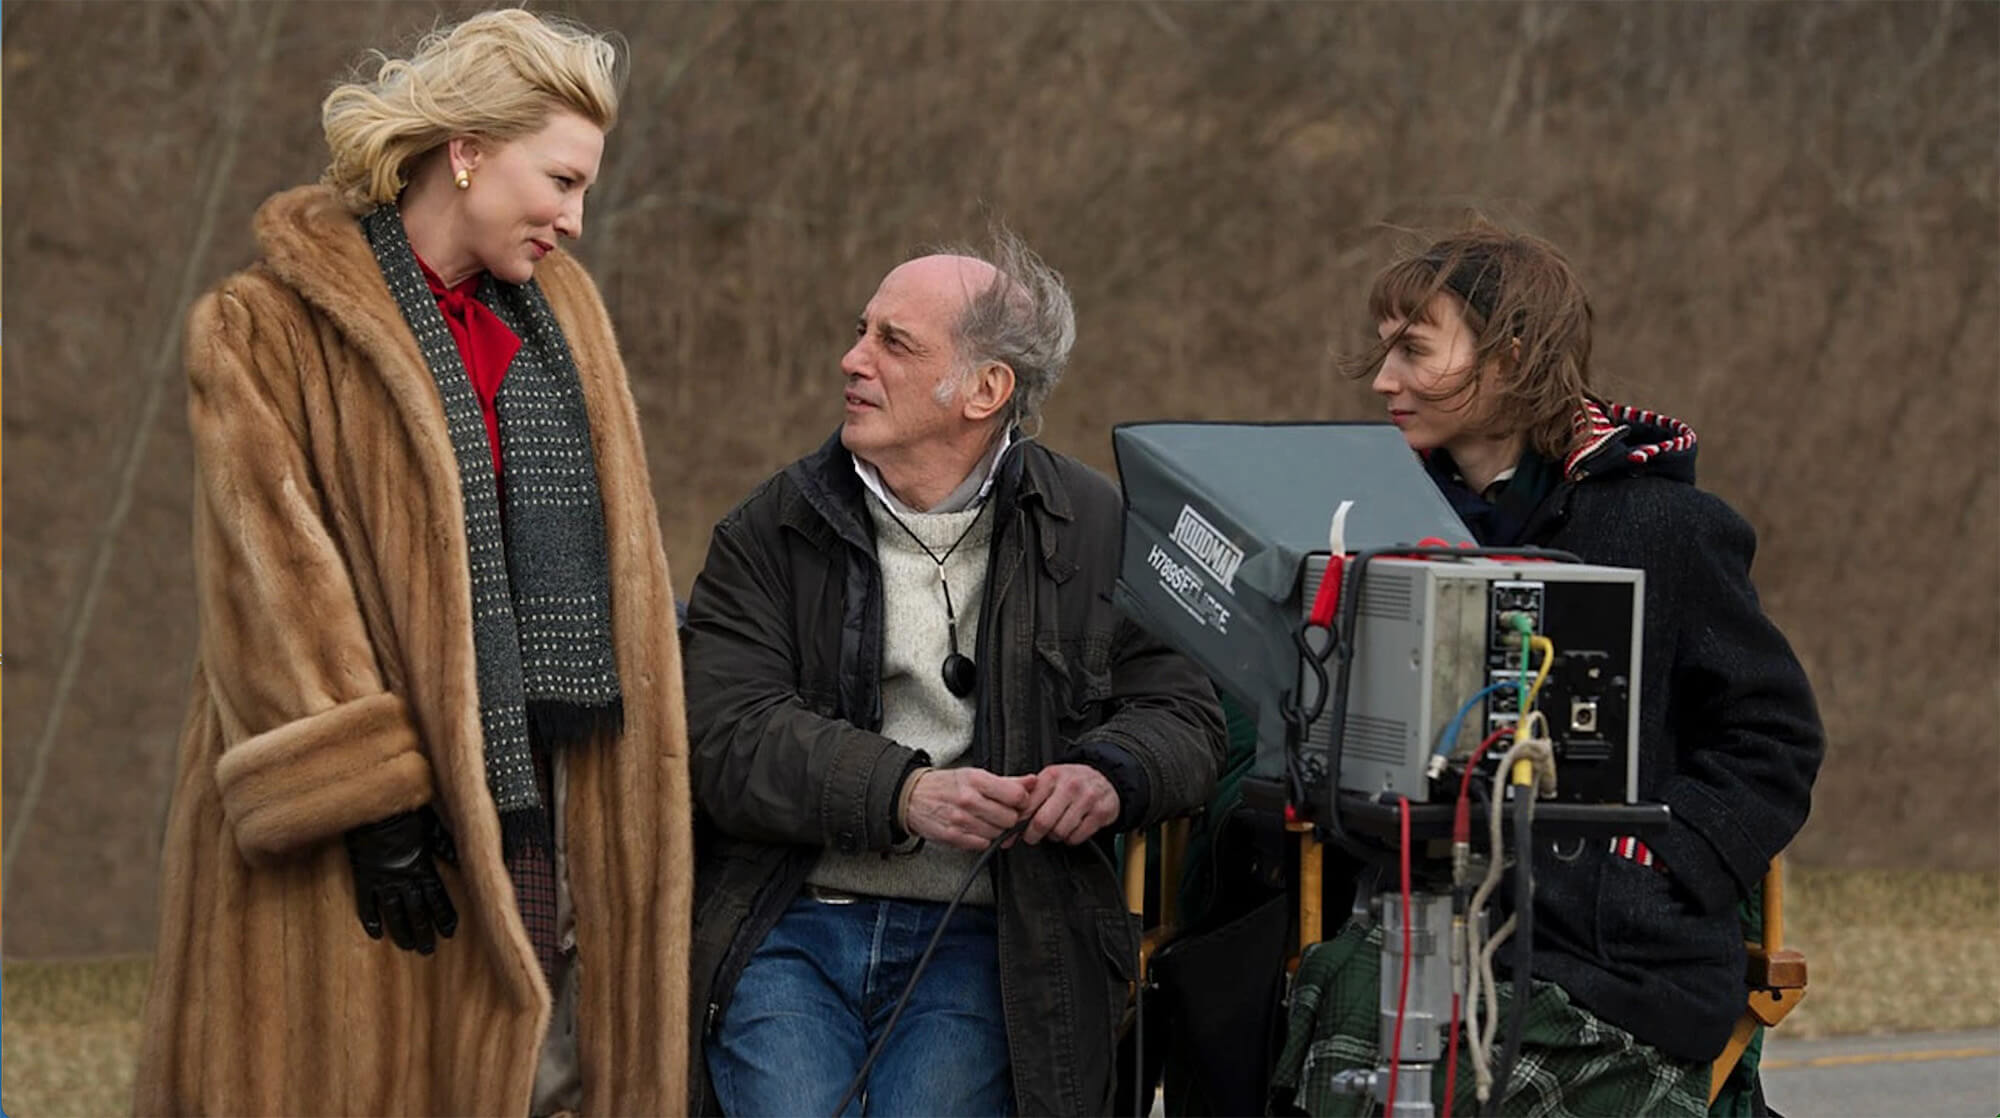 Ed Lachman on set with Cate Blanchett and Rooney Mara.